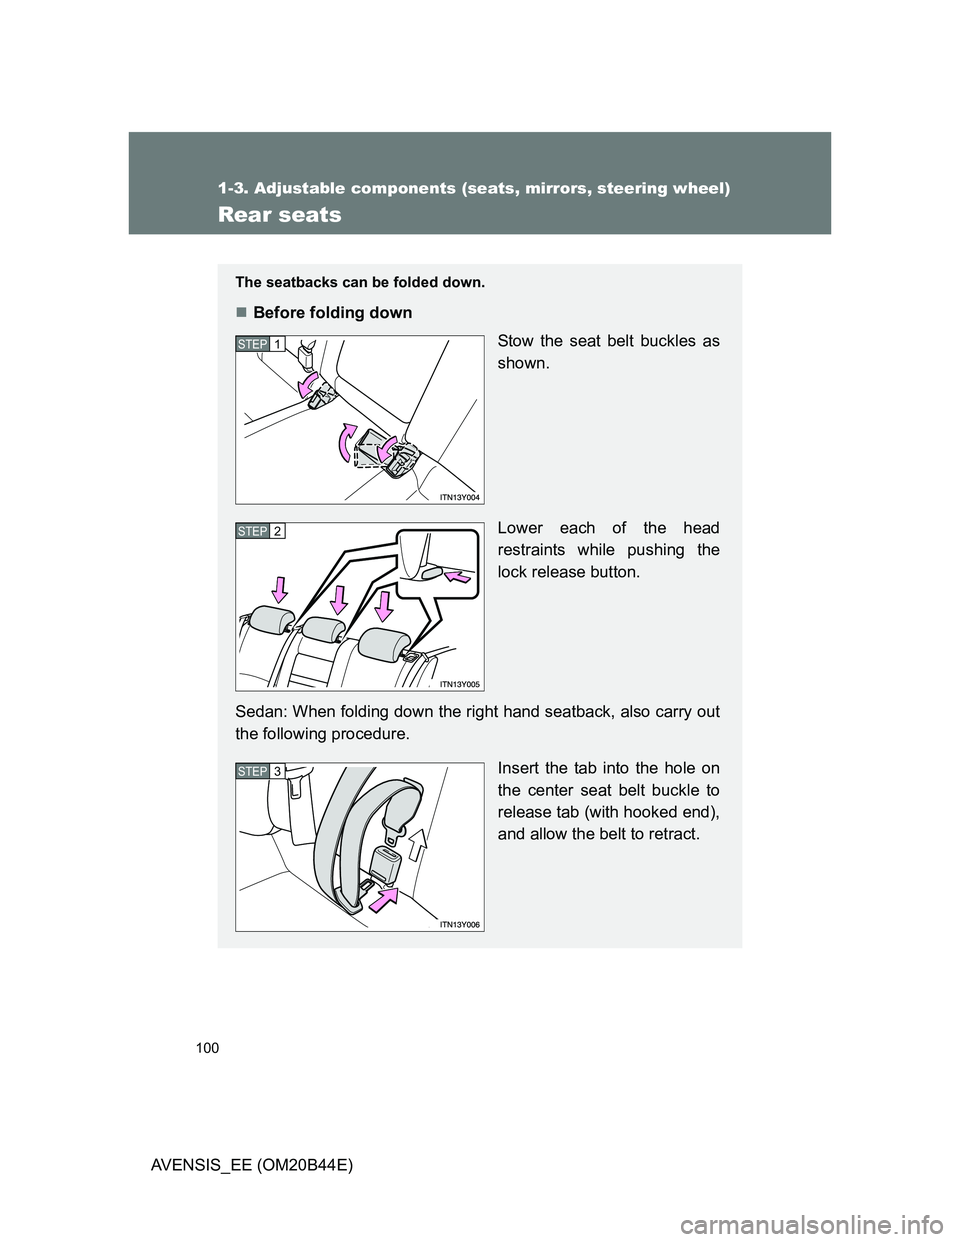 TOYOTA AVENSIS 2012  Owners Manual 100
1-3. Adjustable components (seats, mirrors, steering wheel)
AVENSIS_EE (OM20B44E)
Rear seats
The seatbacks can be folded down.
Before folding down
Stow the seat belt buckles as
shown.
Lower eac